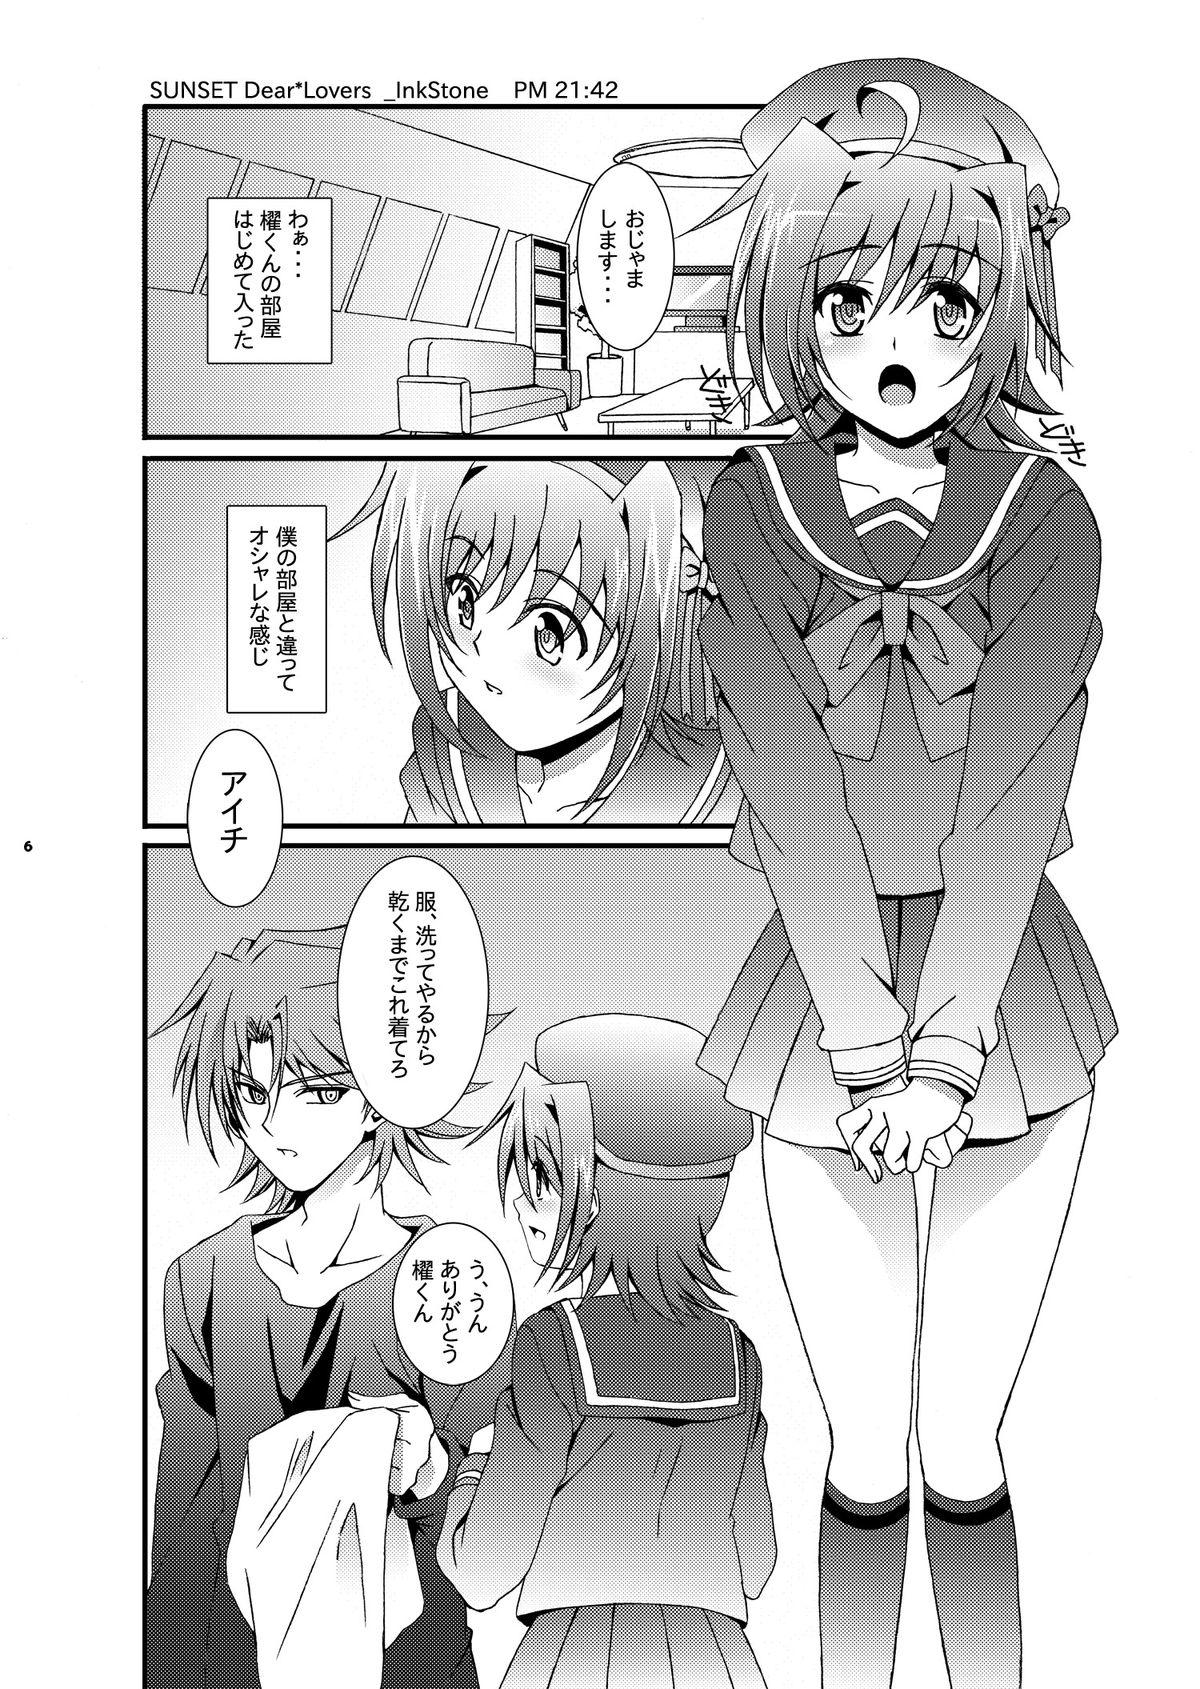 Uncensored SUNSET Dear Lovers - Cardfight vanguard Innocent - Page 7